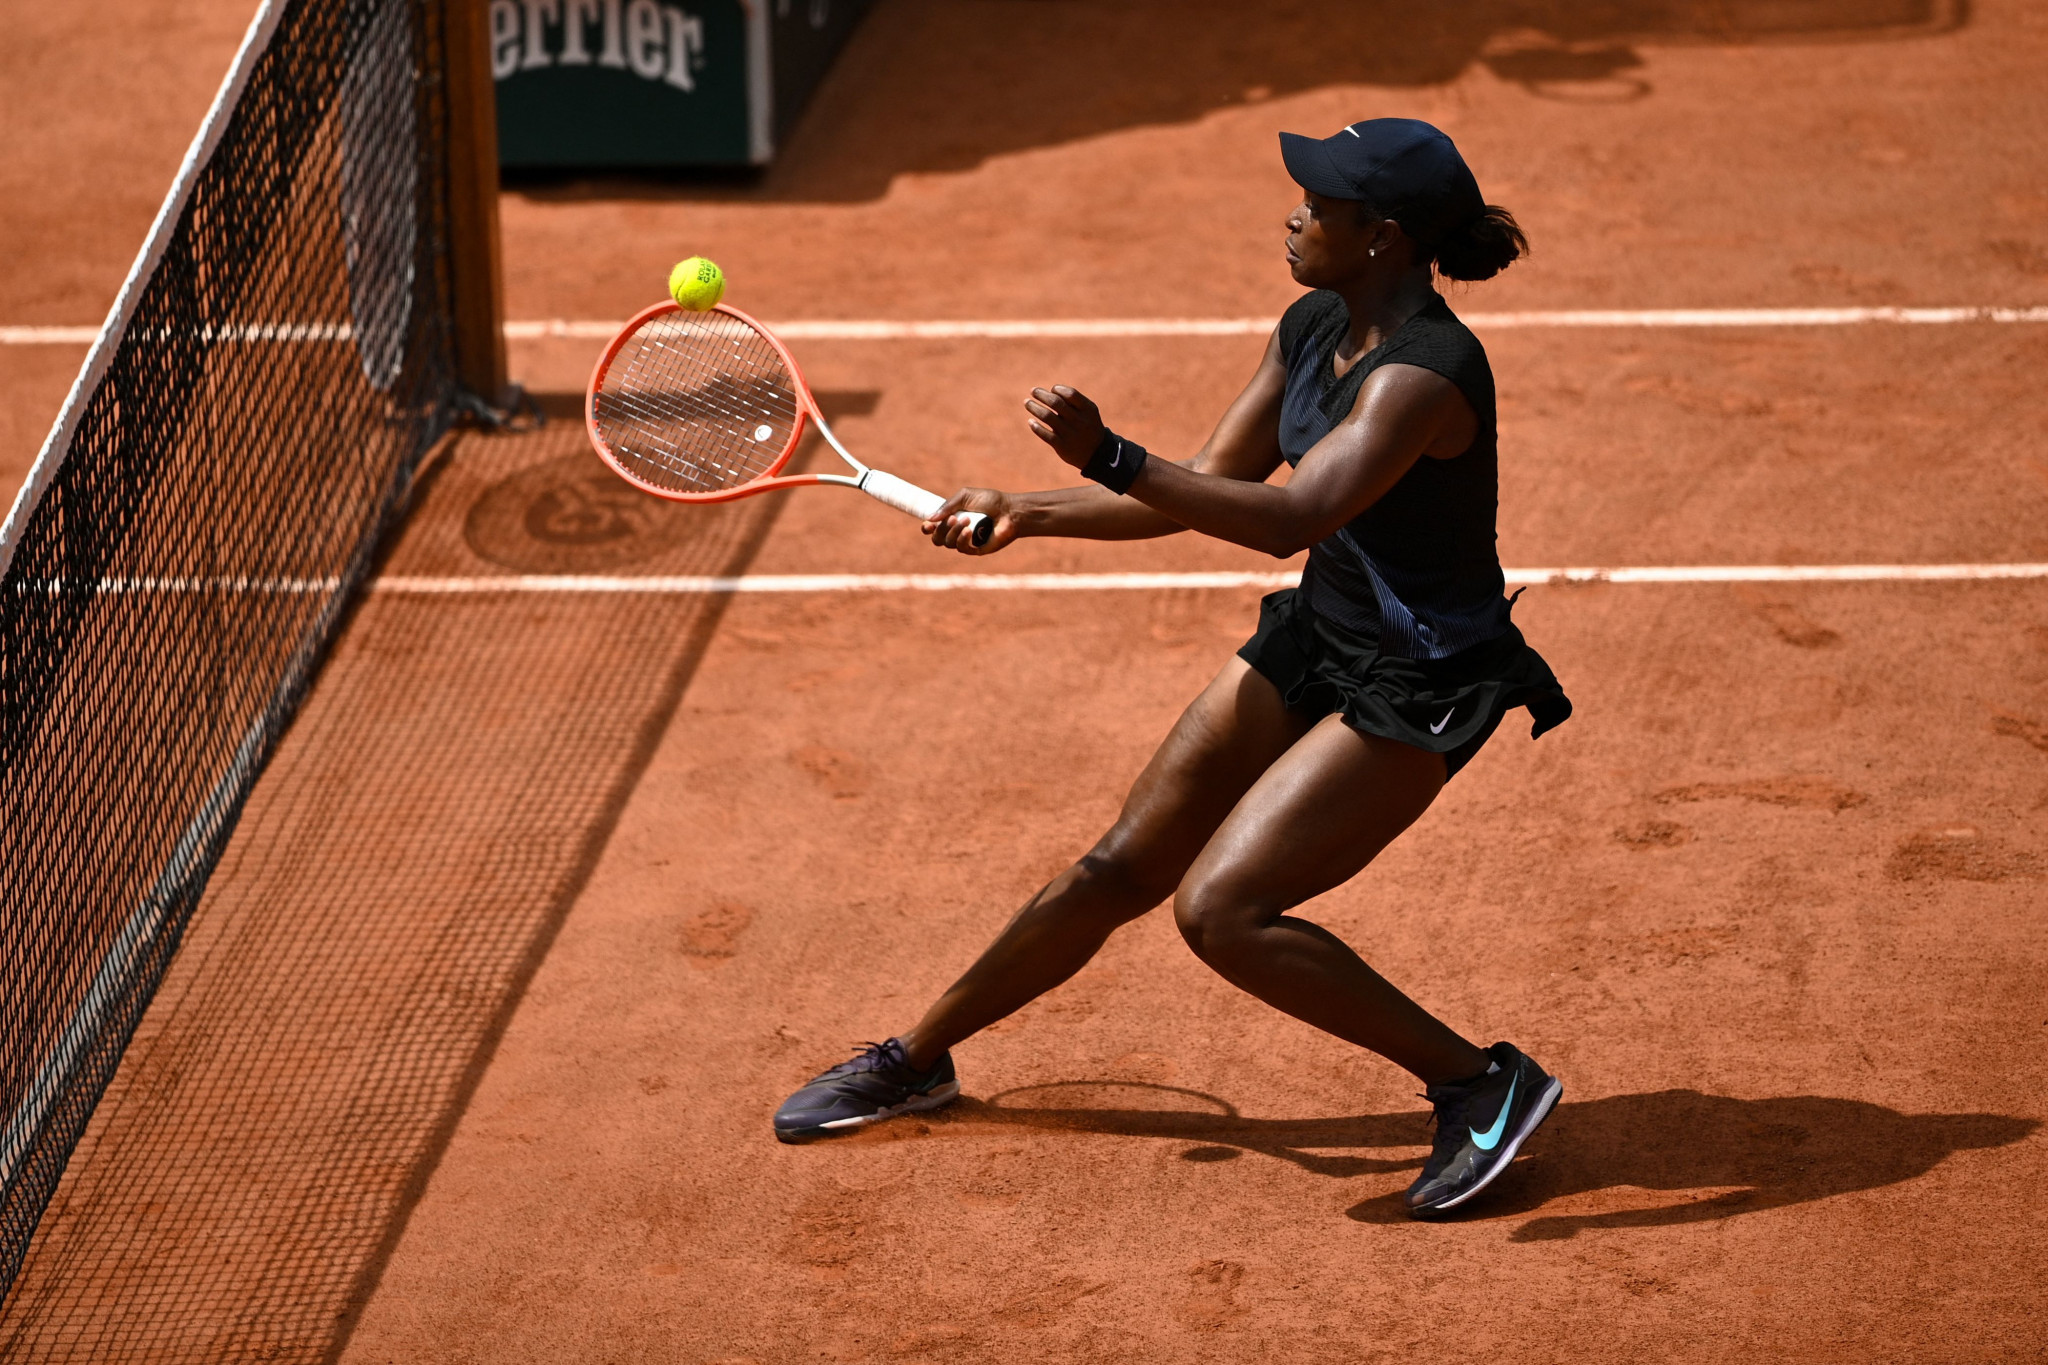 Sloane Stephens looks to play a delicate shot at the net on her way to beating Karolína Plíšková ©Getty Images